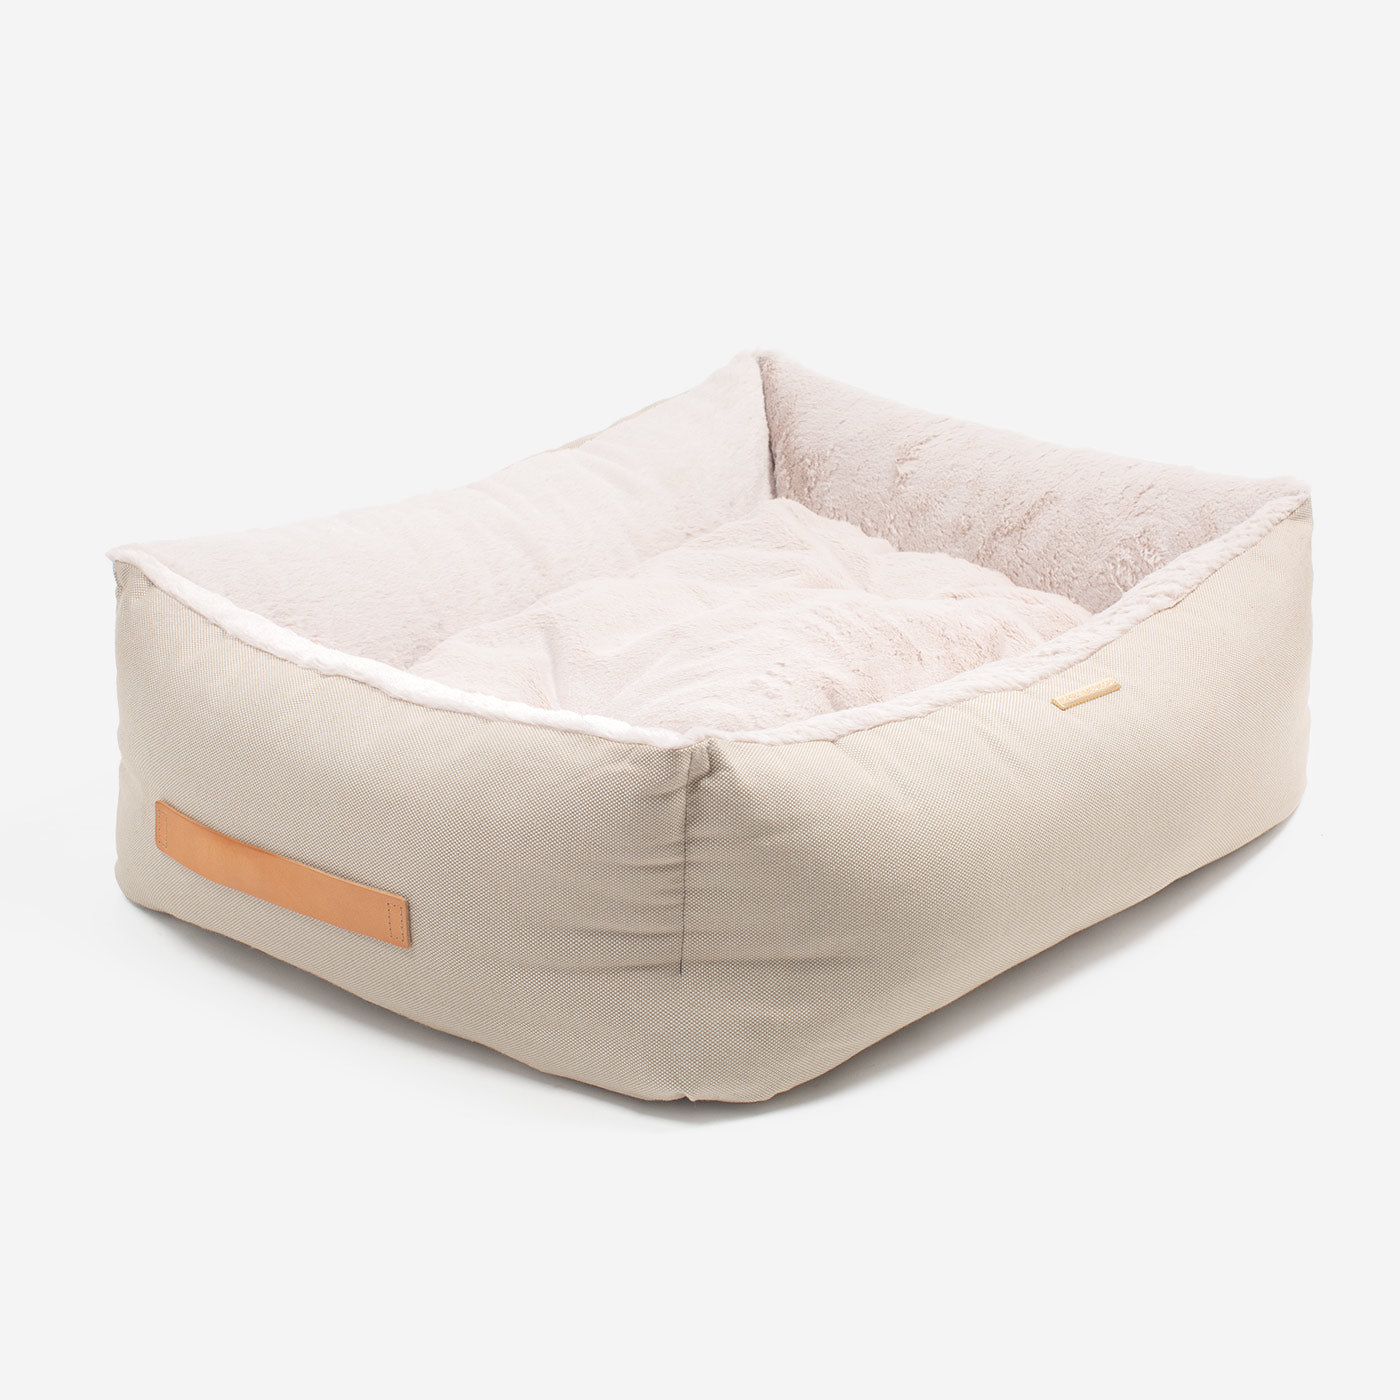 Discover This Luxurious Box Bed For Dogs, Made Using Beautiful Twill Fabric To Craft The Perfect Dog Box Bed! In Stunning Cream Linen, Available Now at Lords & Labradors    